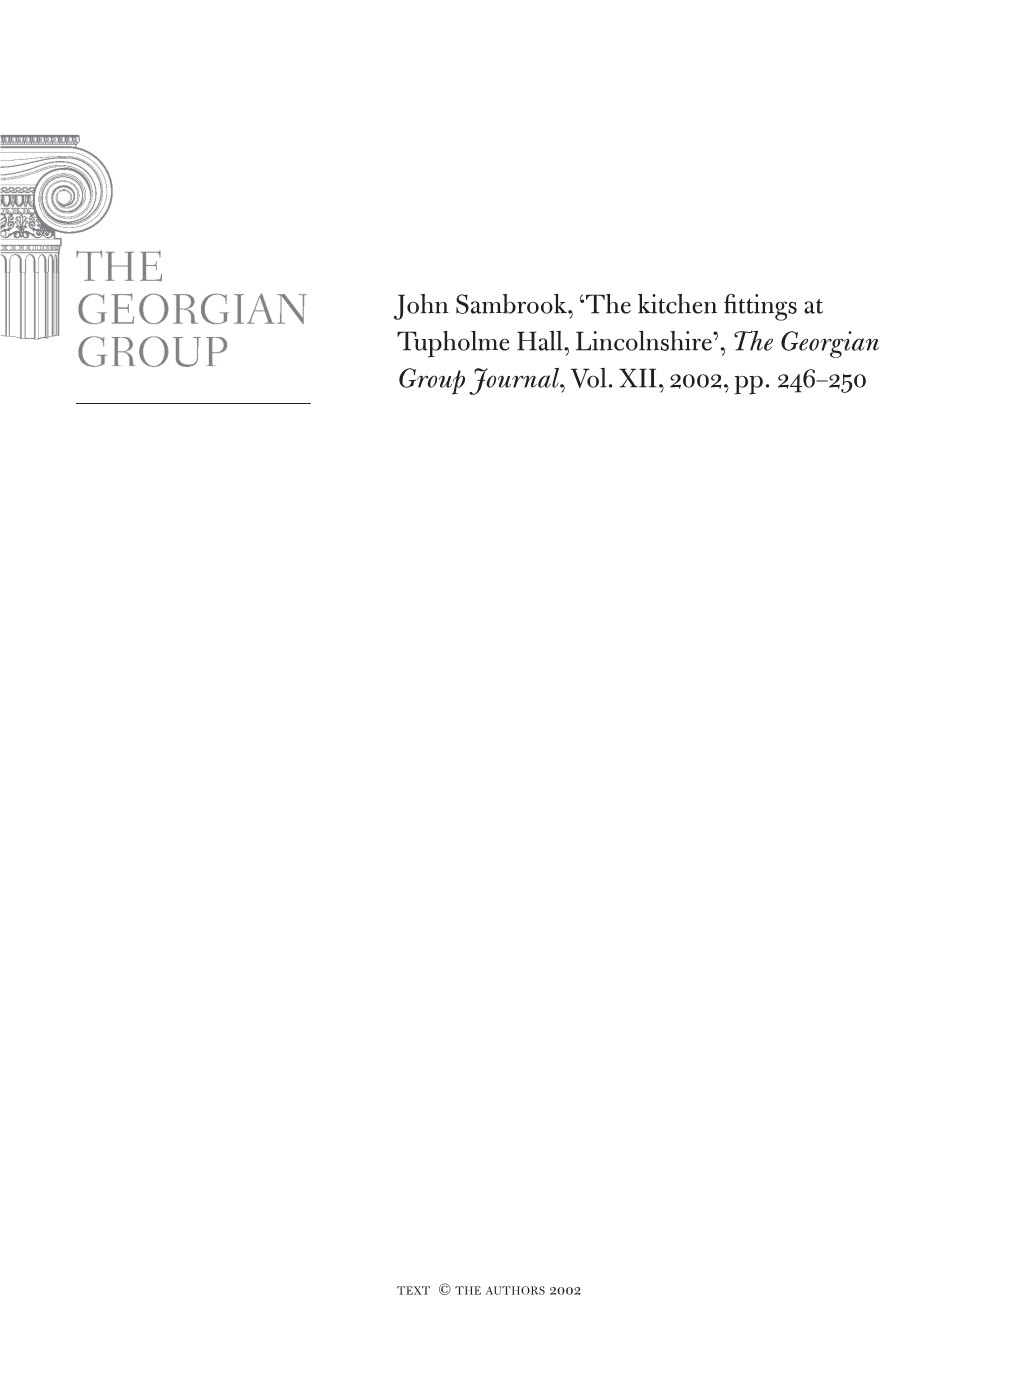 The Kitchen Fittings at Tupholme Hall, Lincolnshire’, the Georgian Group Journal, Vol